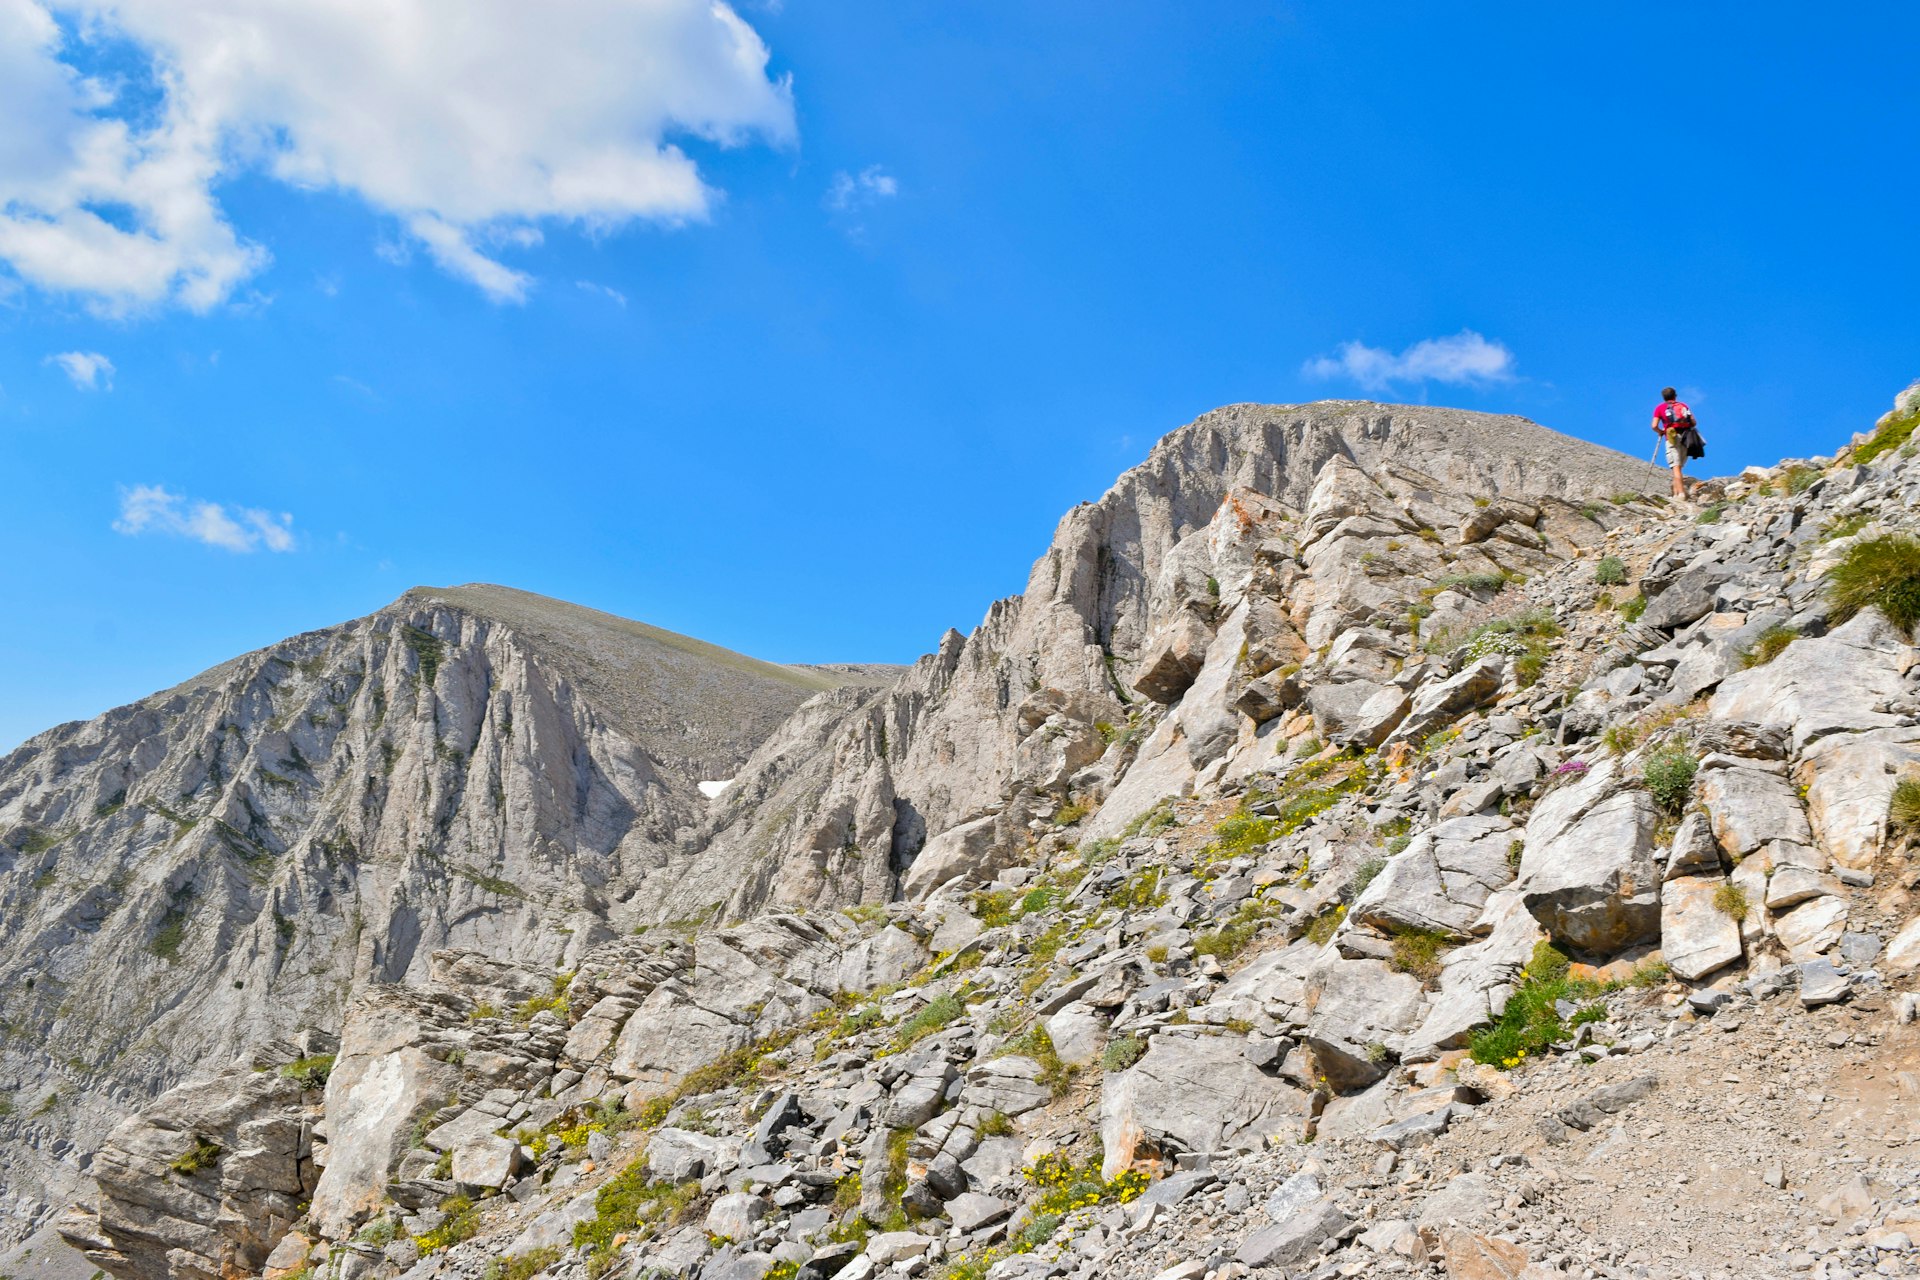 A hiker walks up a steep, rocky path to the peak of Mt Olympus. The mountain peak is bare and rocky and a blue sky is visible above.